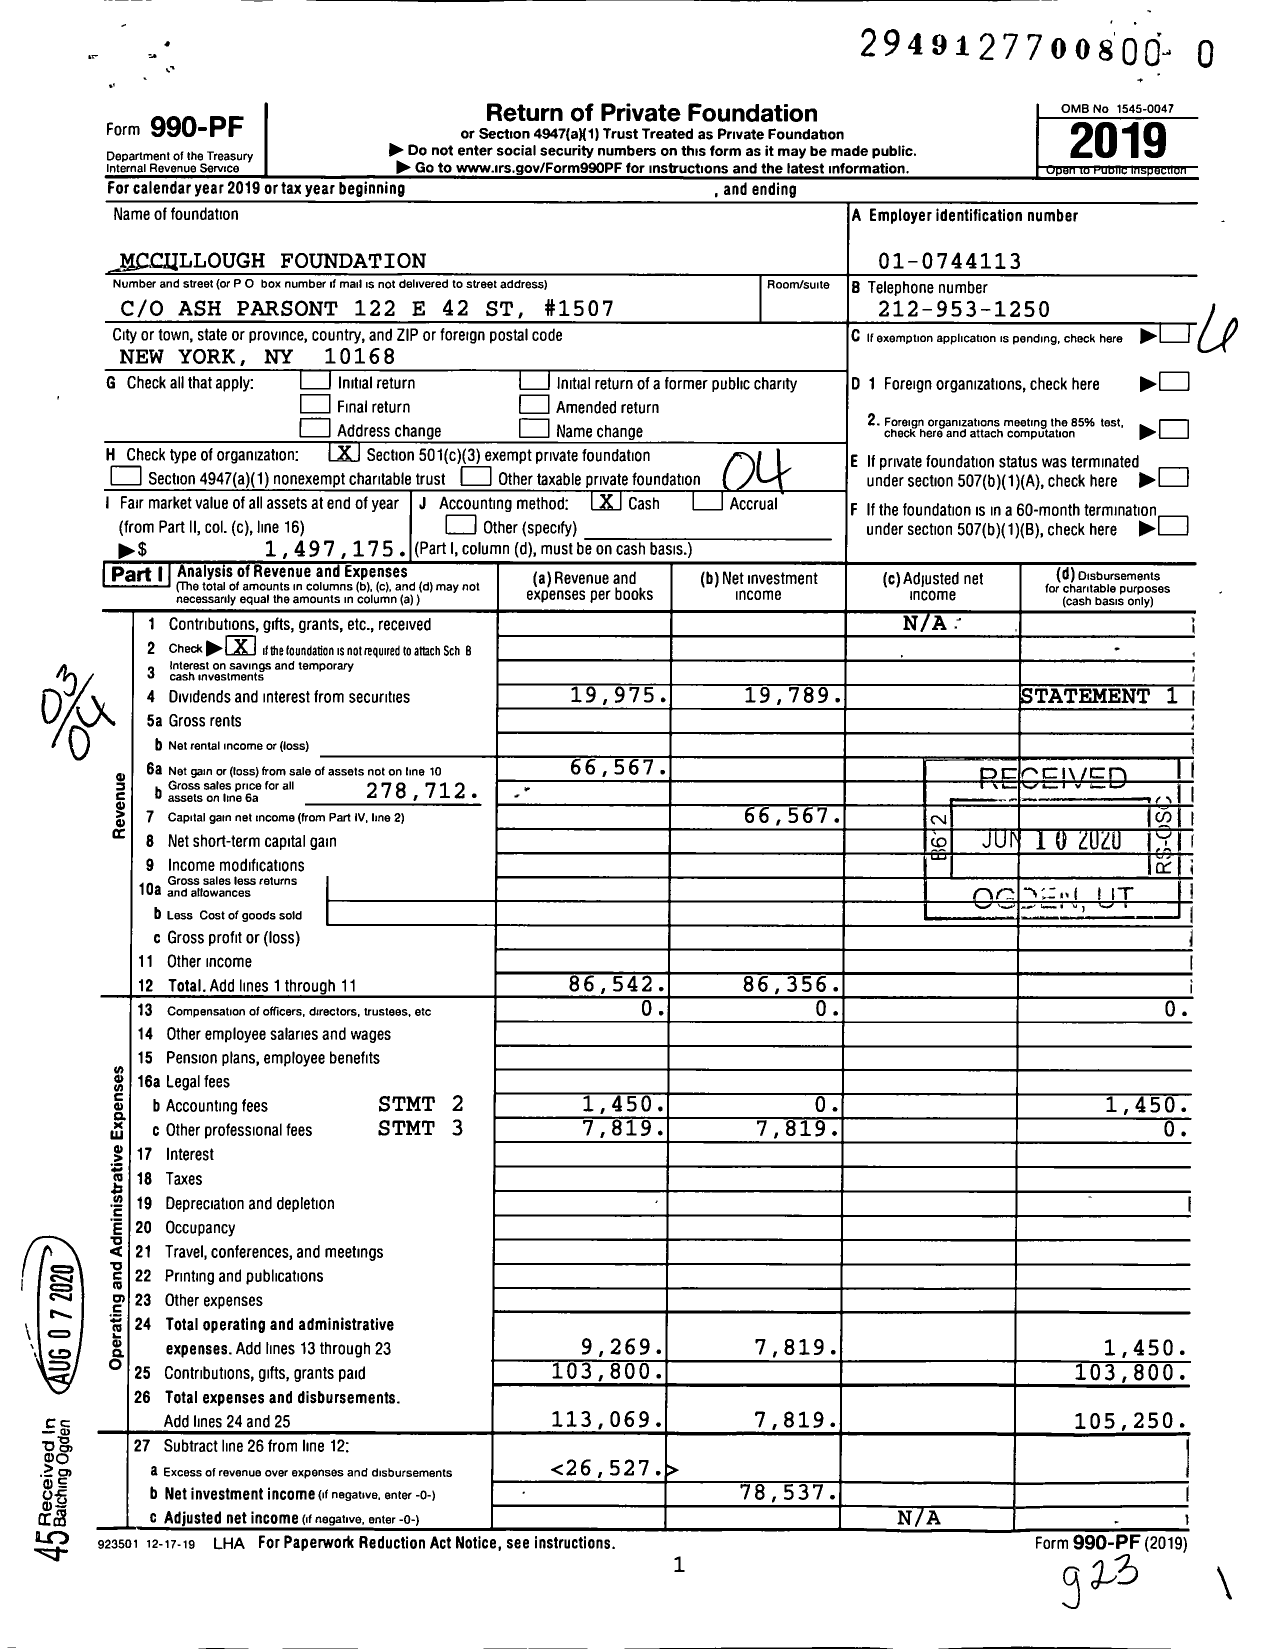 Image of first page of 2019 Form 990PF for Mccullough Foundation